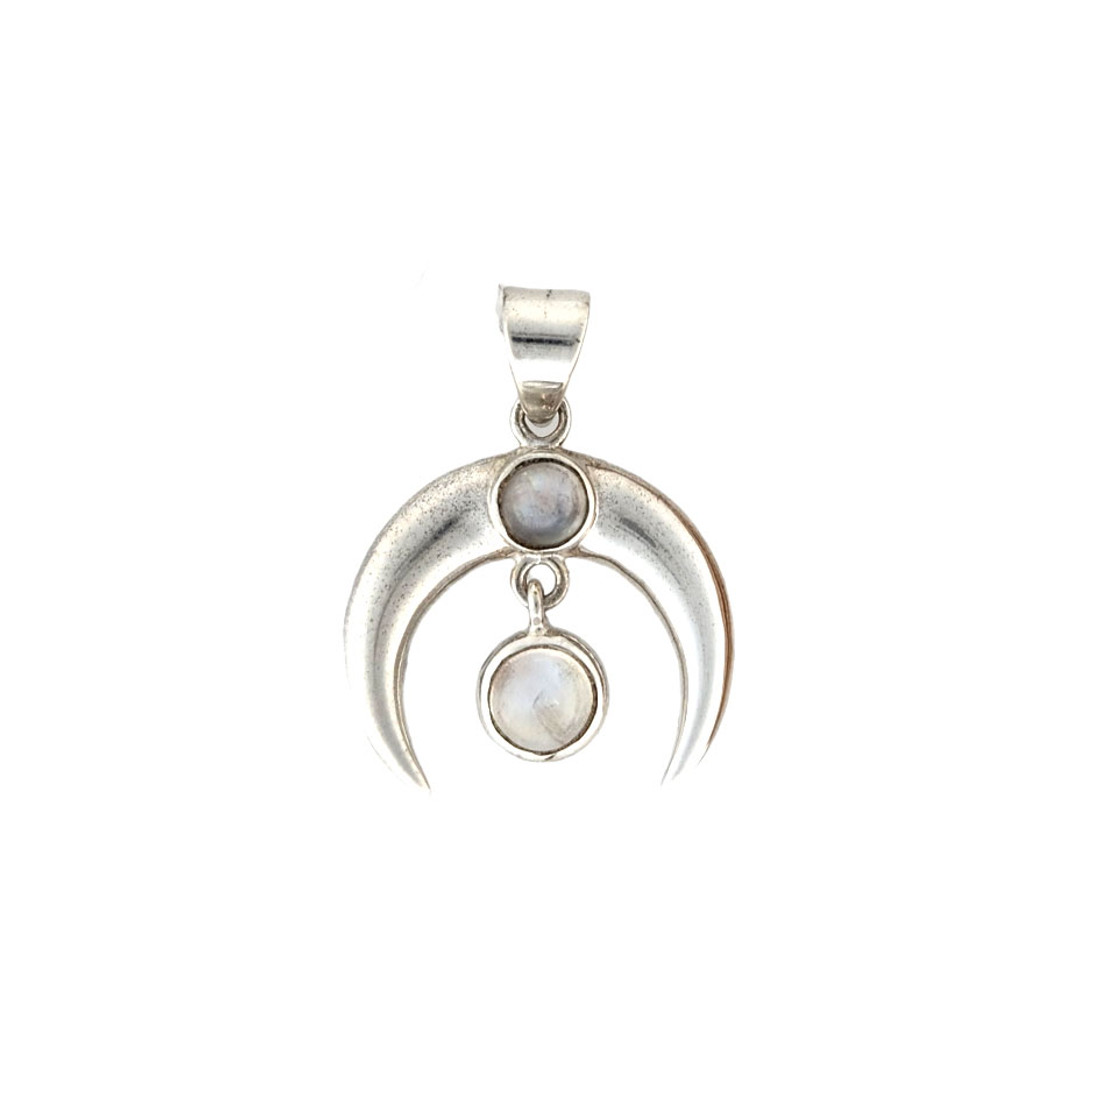 Crescent moon with Moonstone sterling silver pendant. 